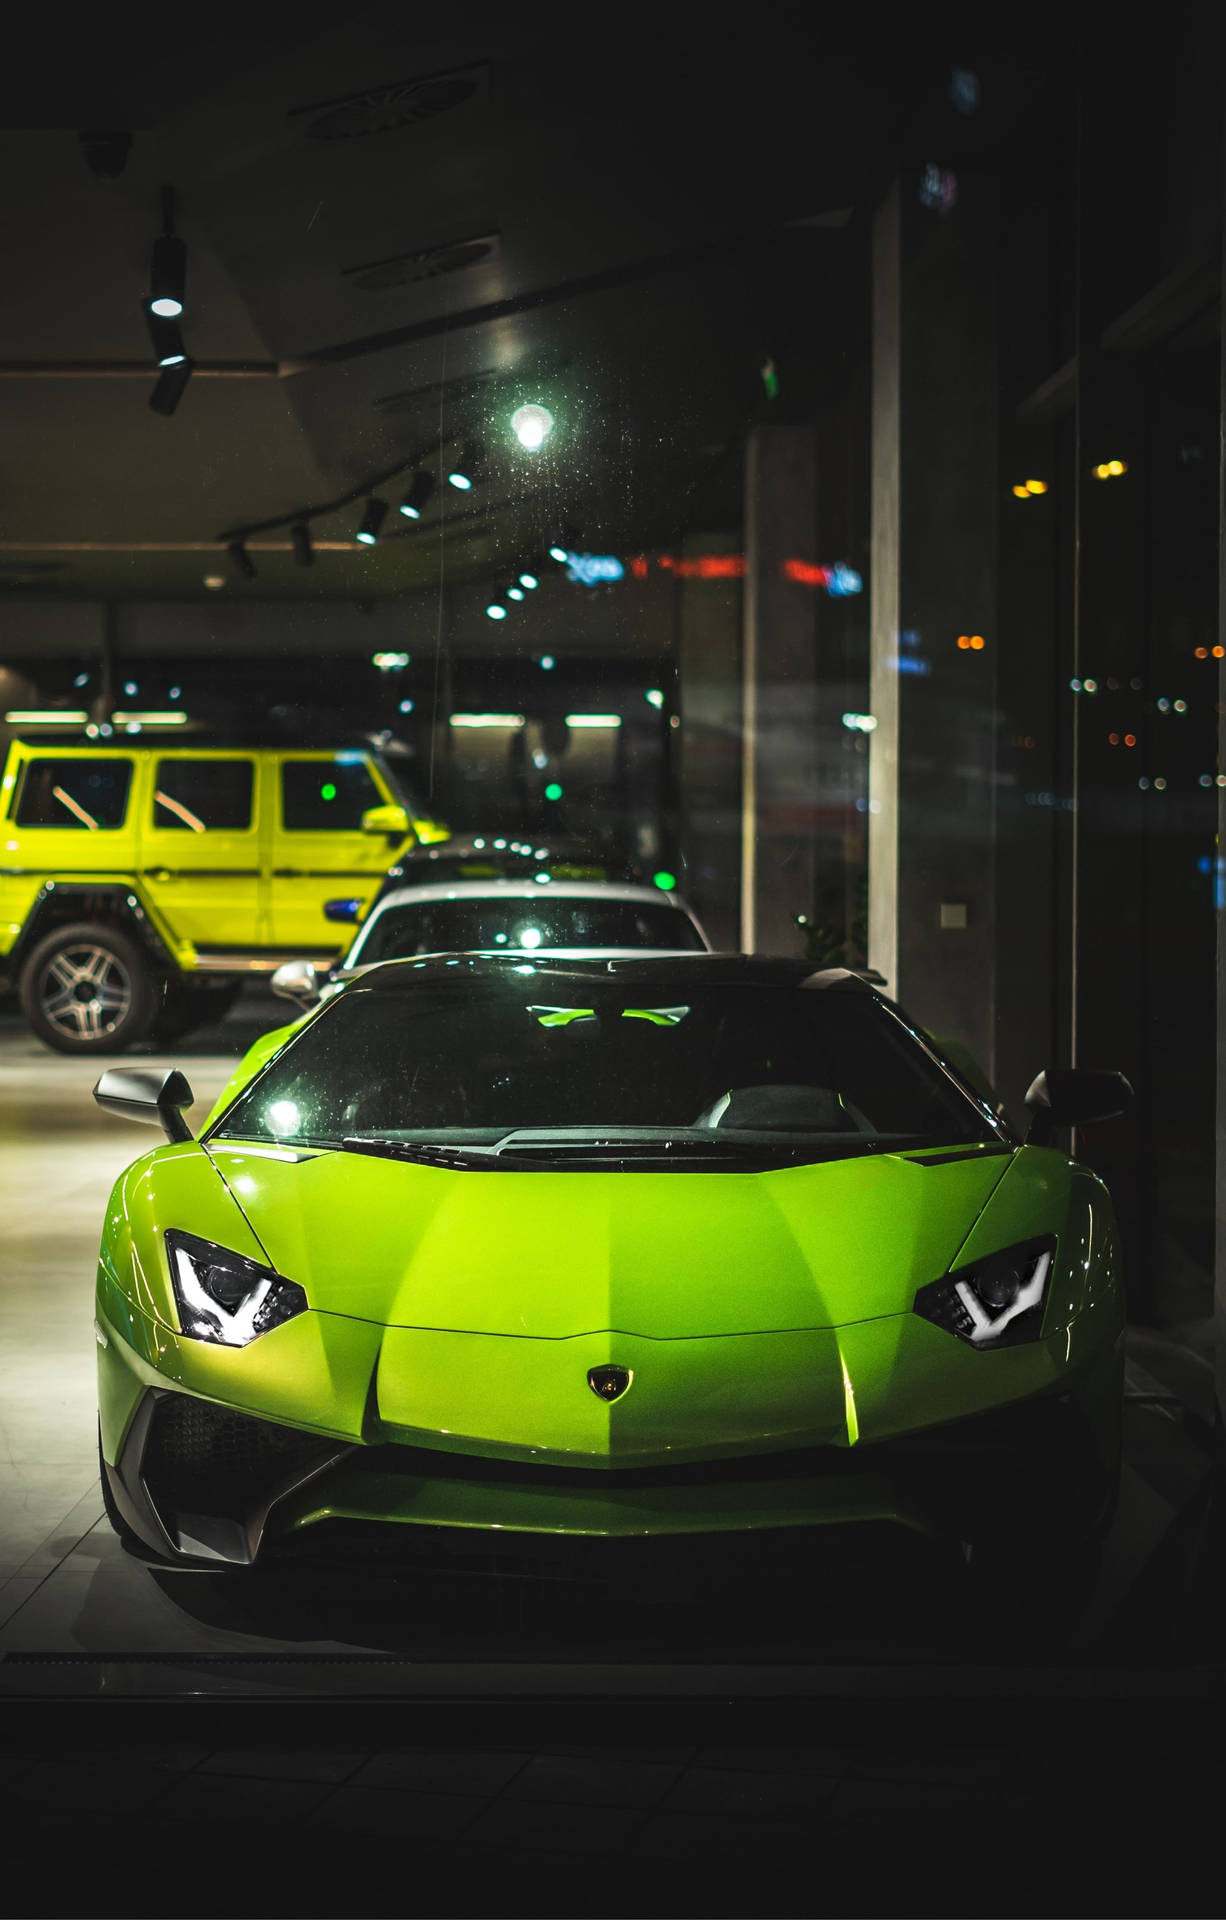 Experience the power of a Lamborghini on your Iphone. Wallpaper